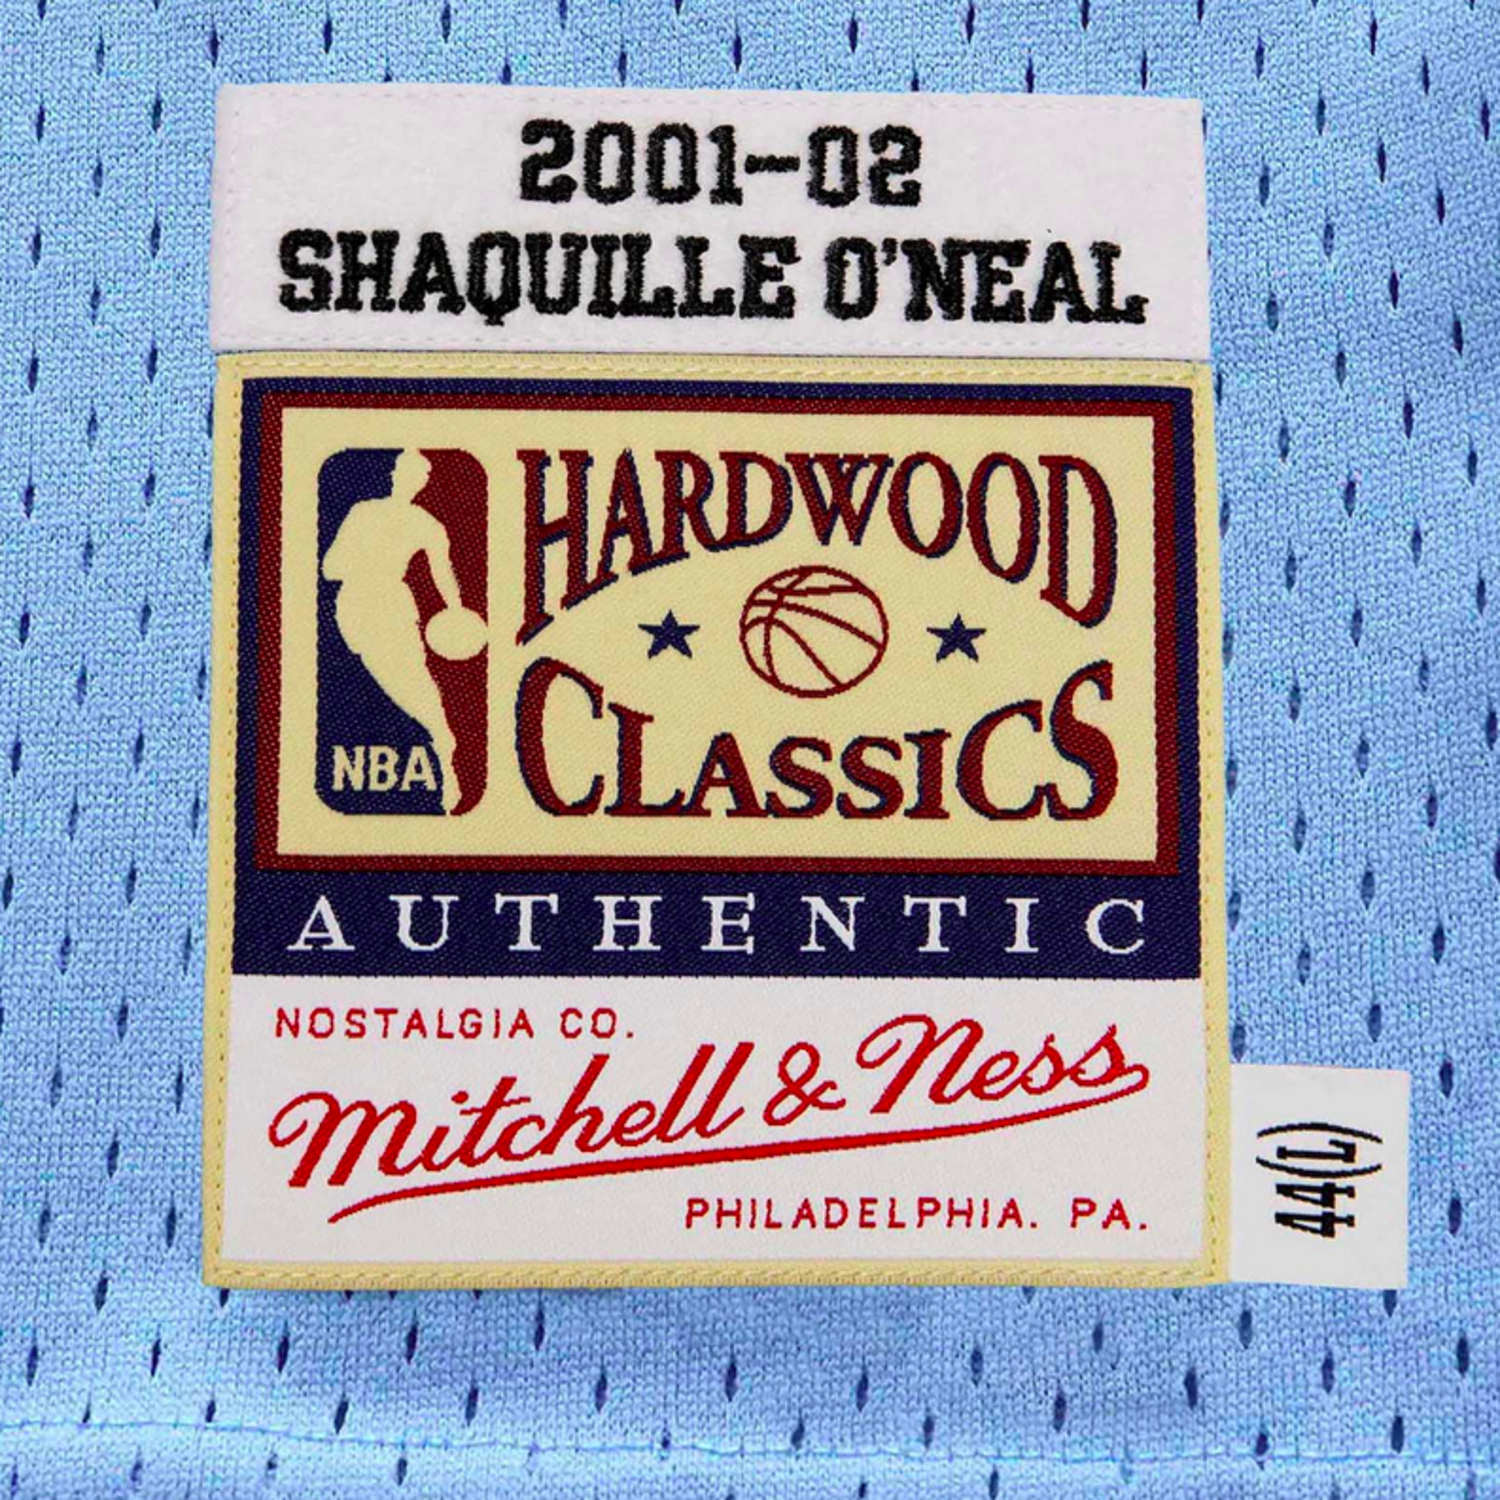 Authentic Shaquille O'Neal Los Angeles Lakers 2001-02 Jersey - Shop  Mitchell & Ness Authentic Jerseys and Replicas Mitchell & Ness Nostalgia Co.